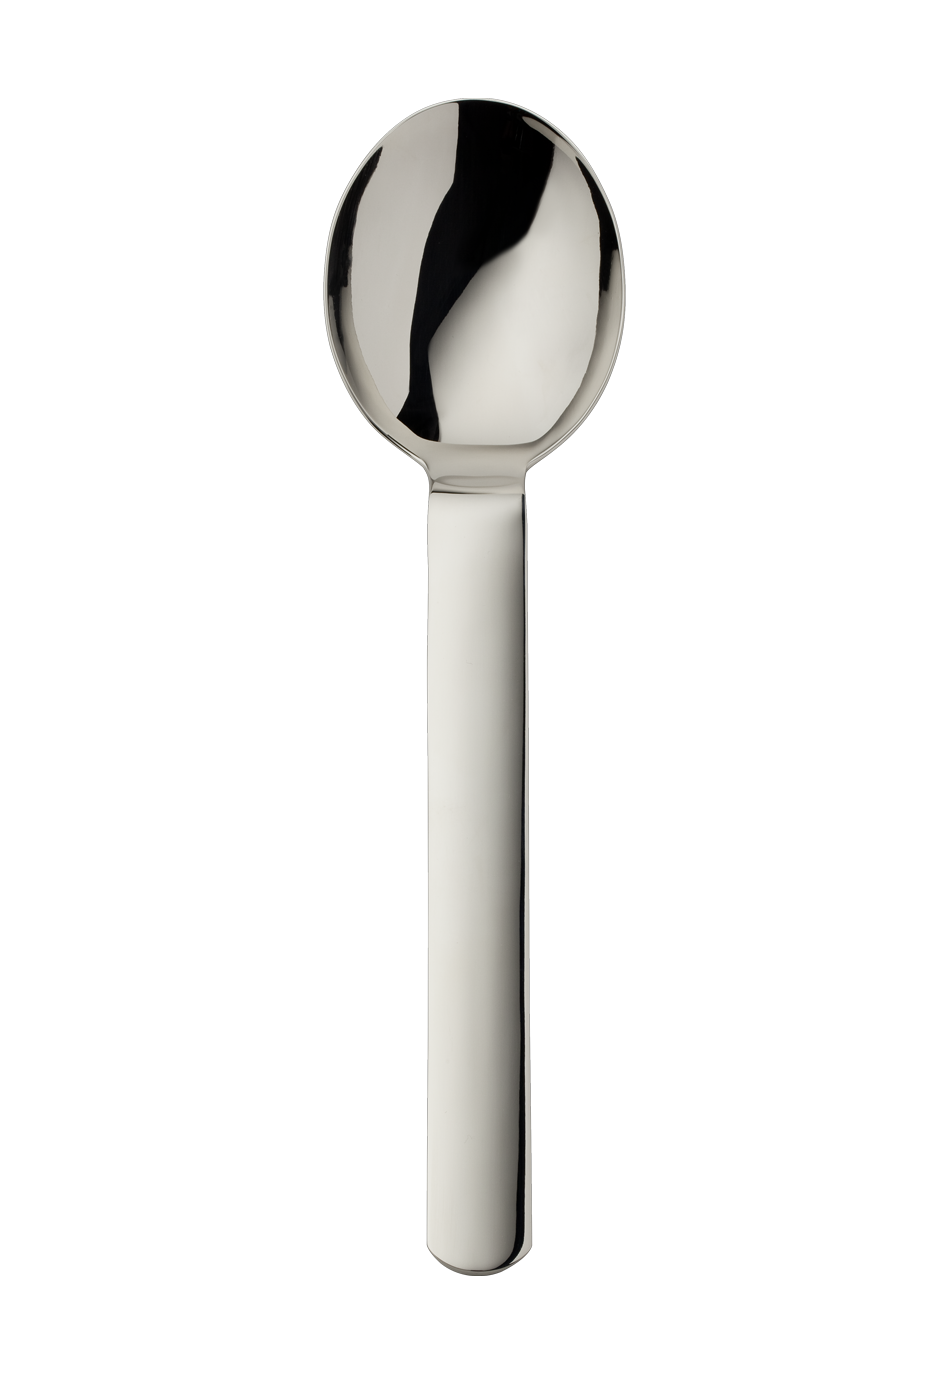 Topos Serving Spoon (18/8 stainless steel)